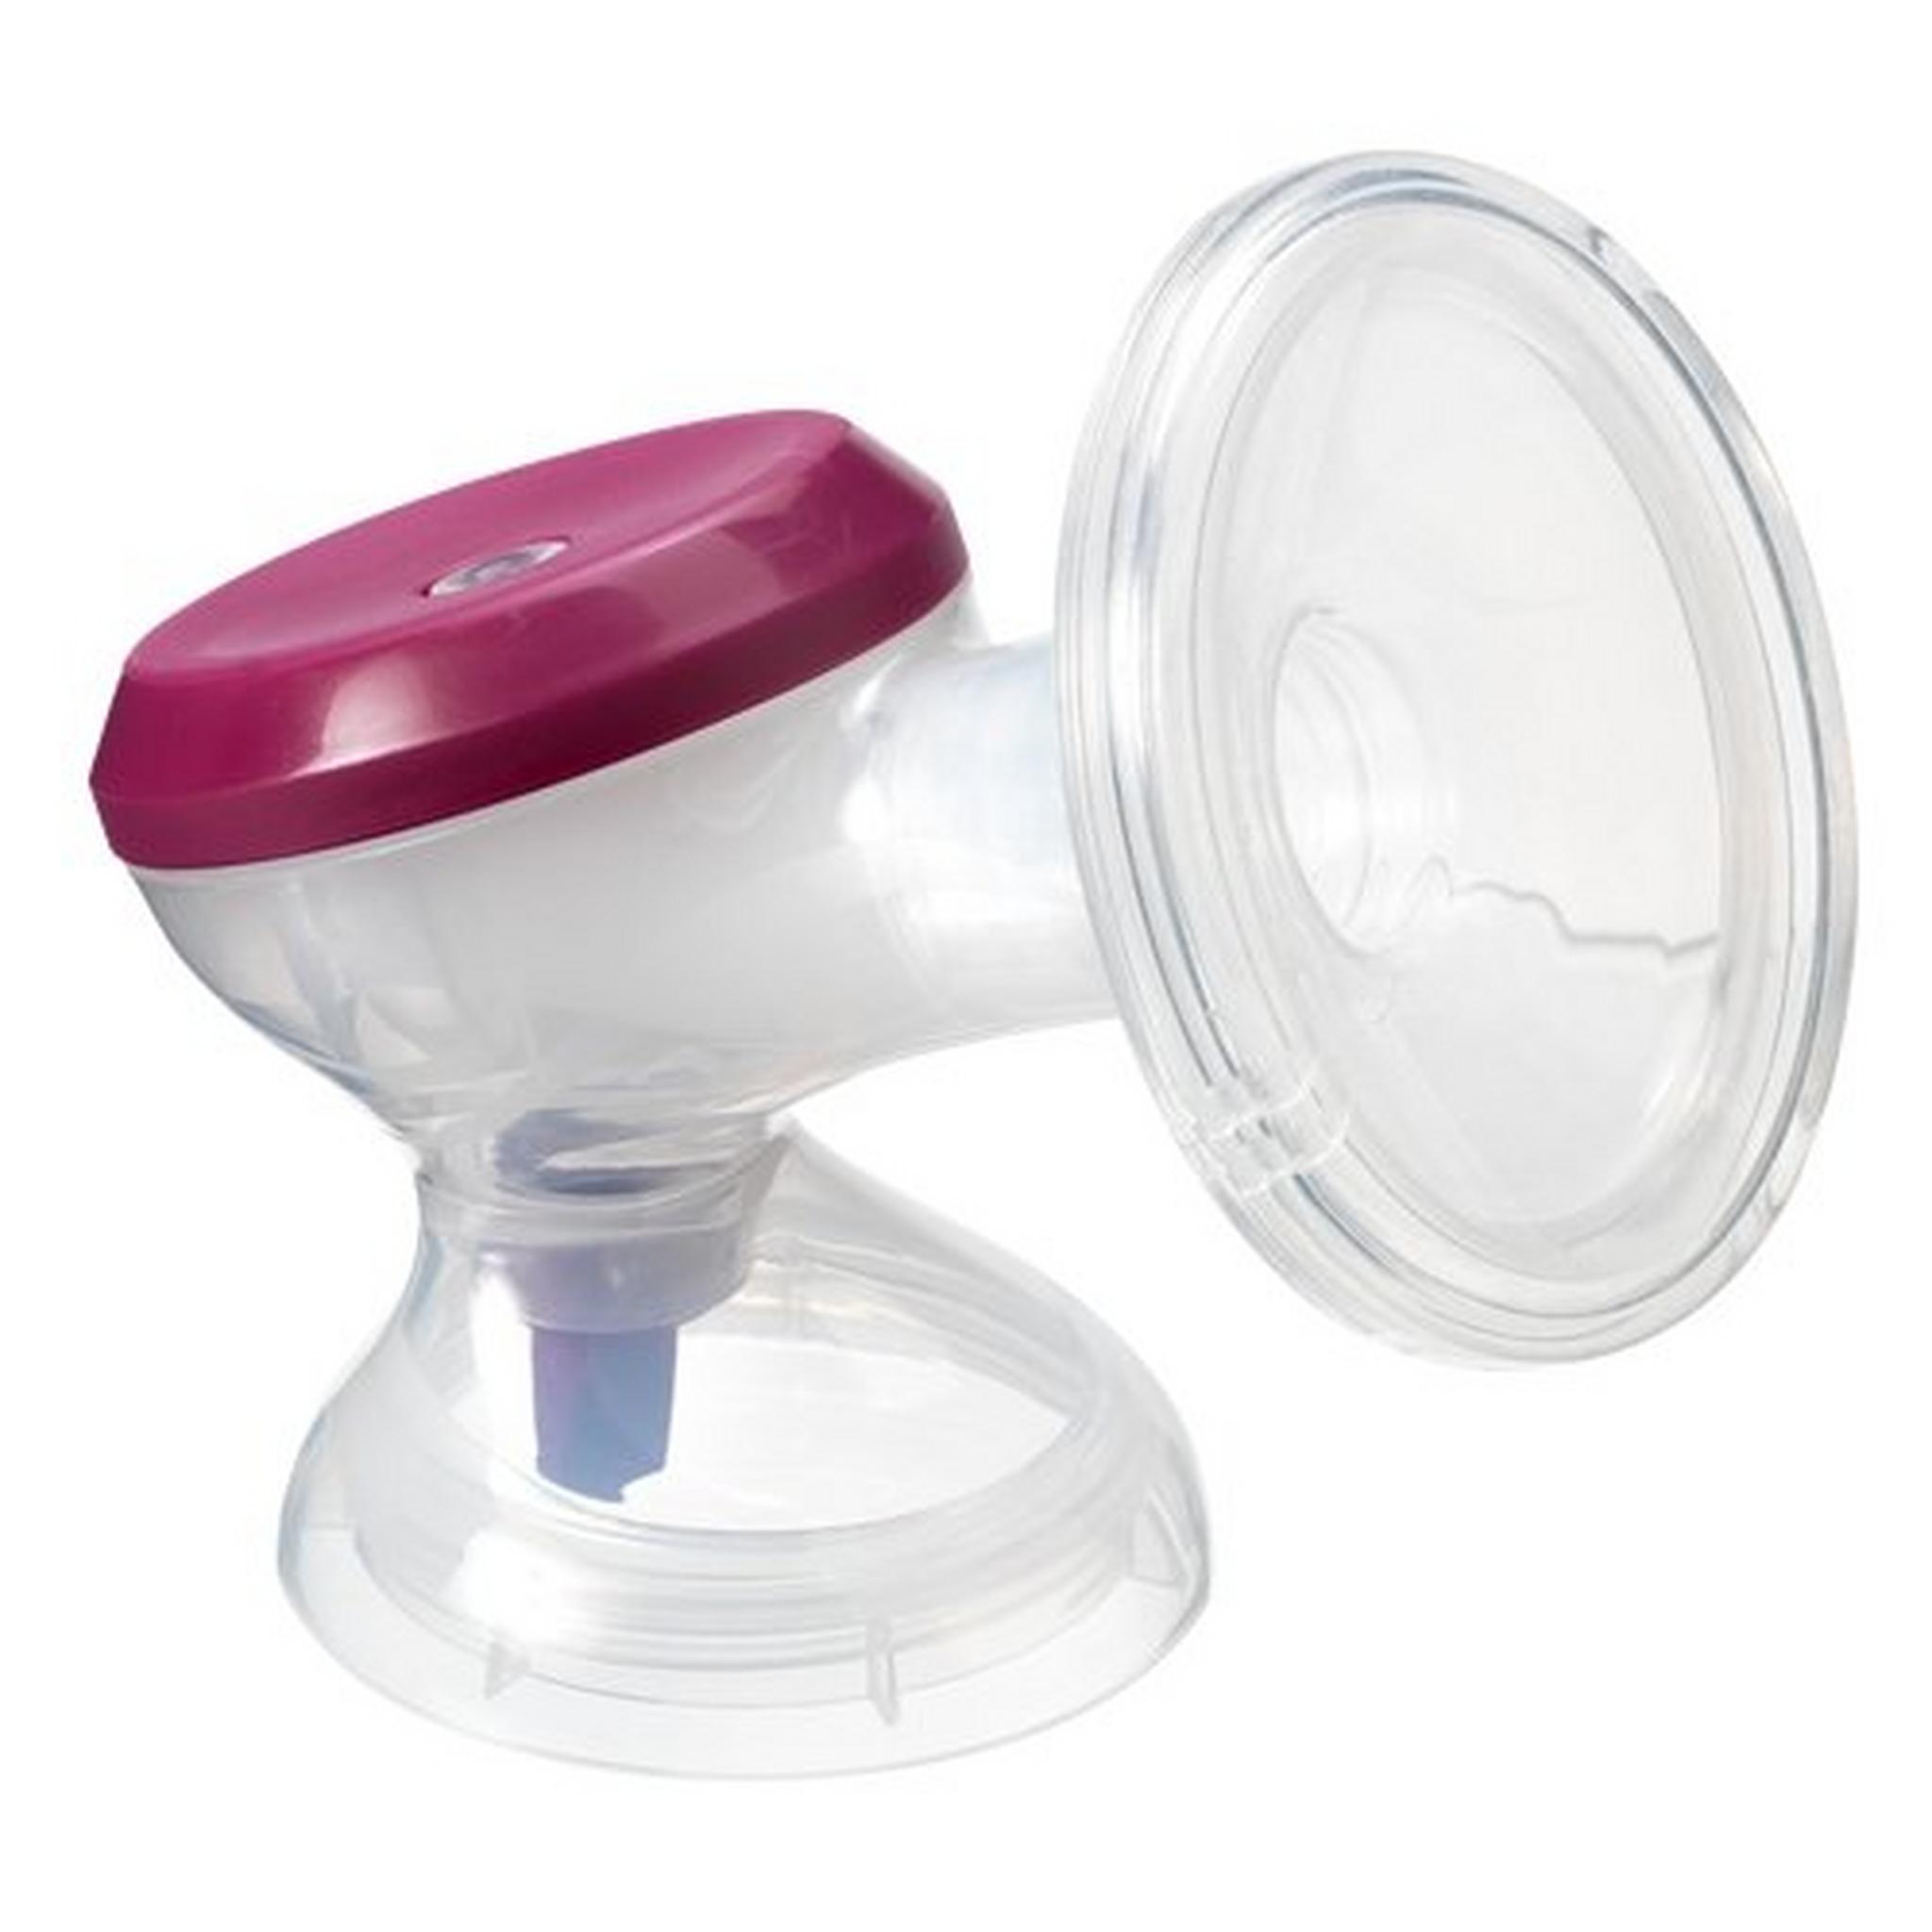 Tommee Tippee Made For Me Electric Breast Pump - TT423620